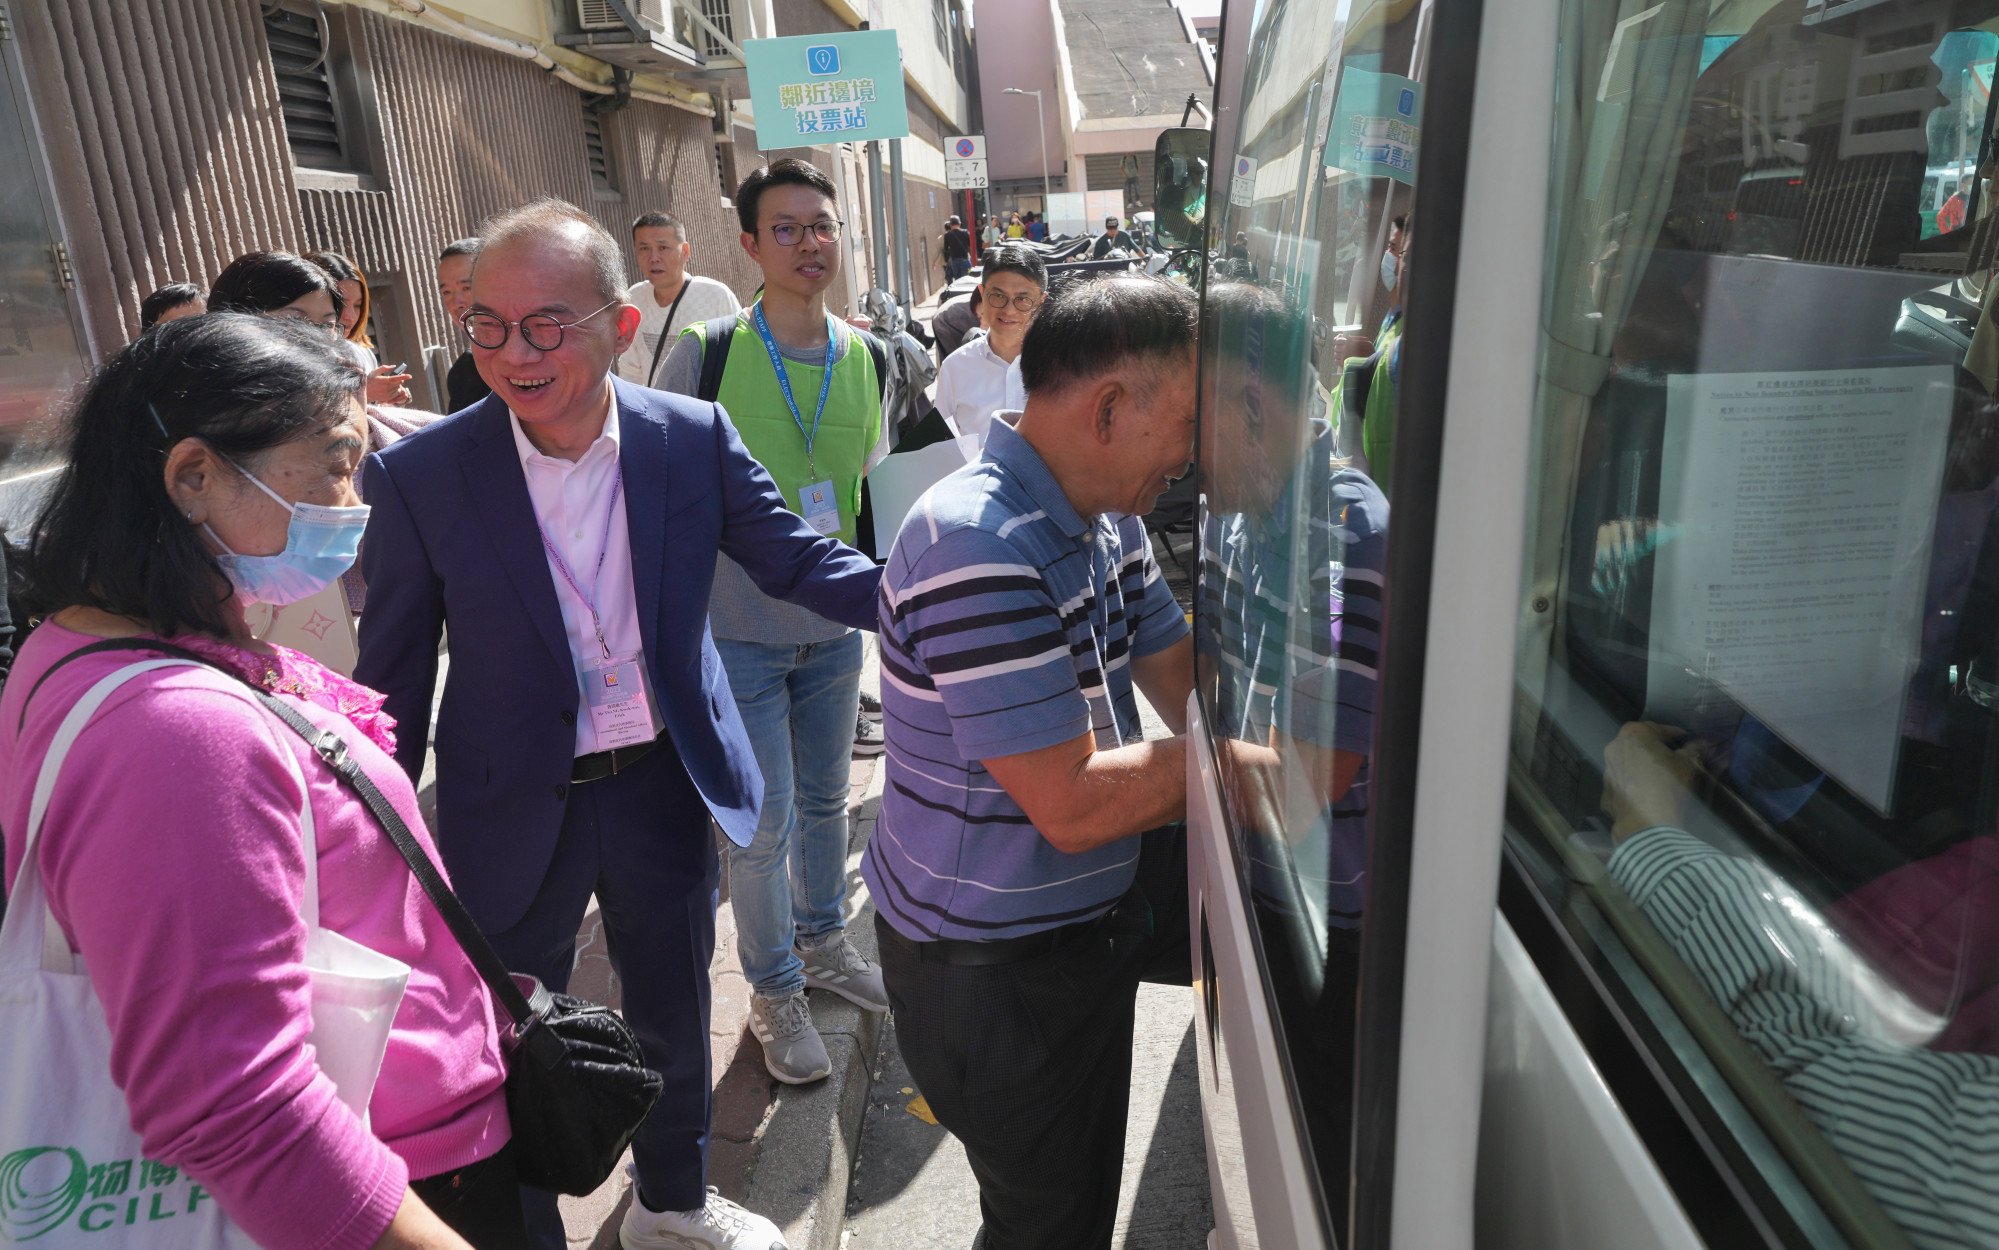 Secretary for Constitutional and Mainland Affairs Erick Tsang helps voters take a shuttle bus to two border polling stations outside the Sheung Shui MTR station. Photo: Elson LI